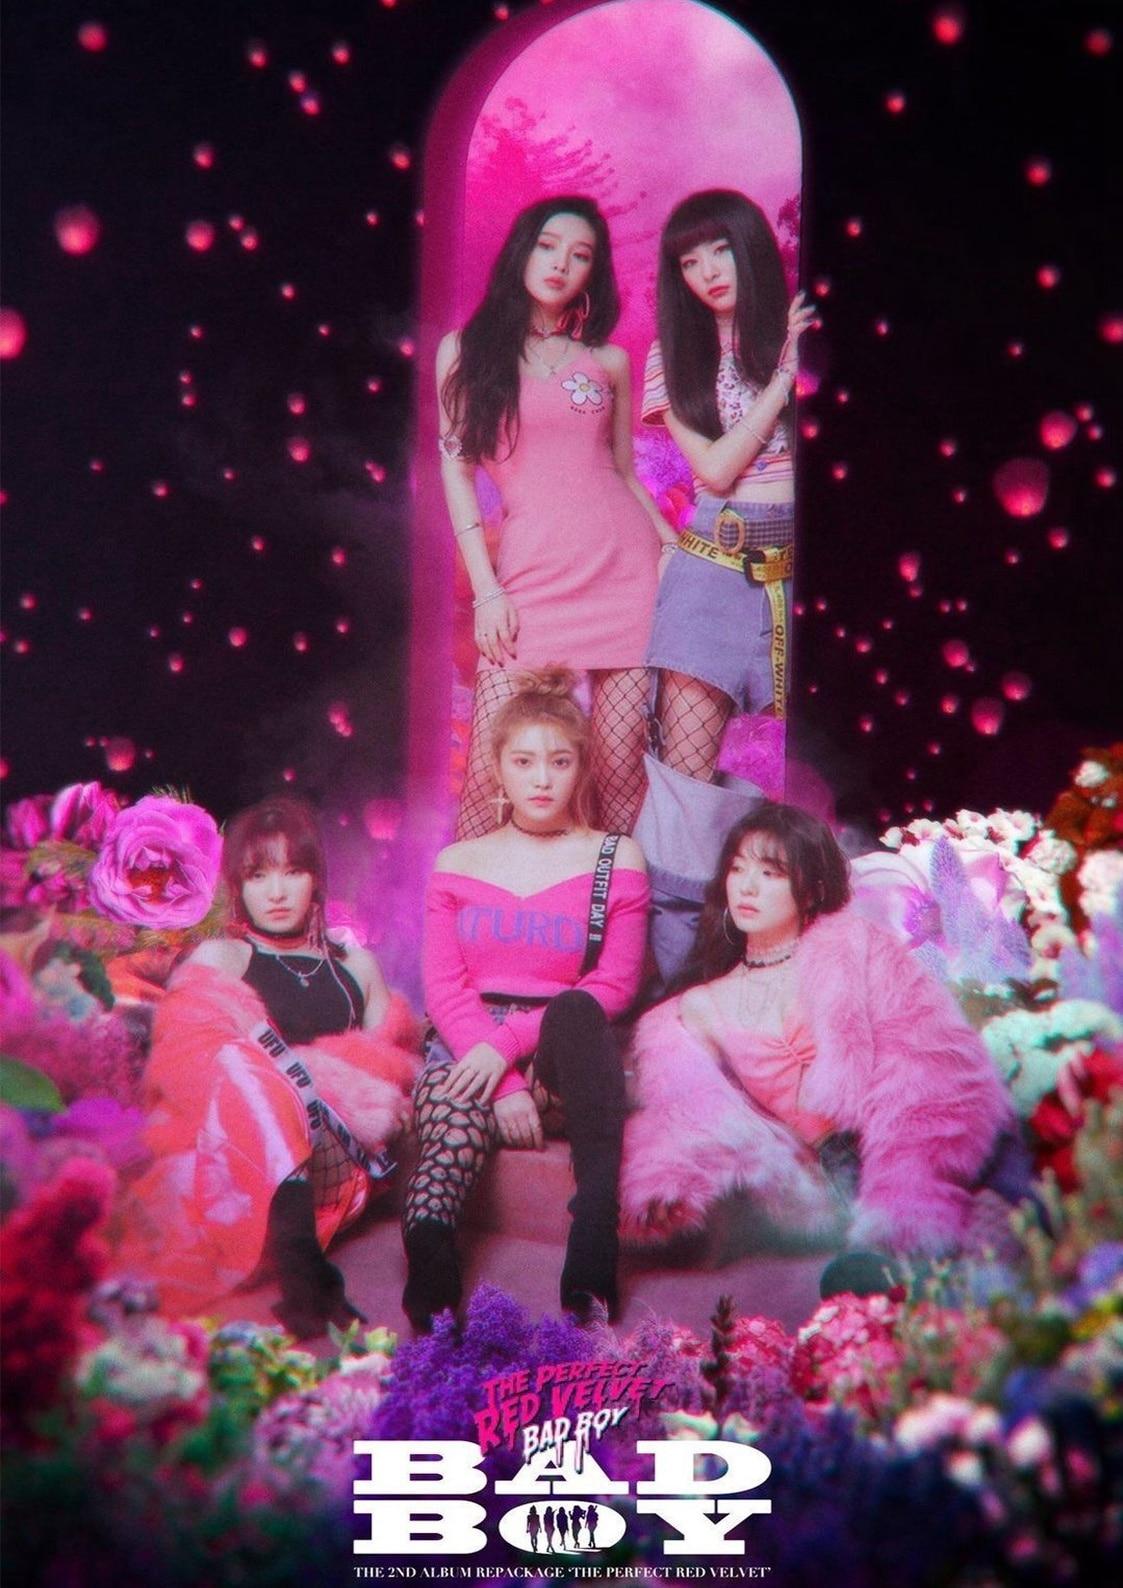 The Perfect Red Velvet Bad Boy Posters Good Quality Painting Coated